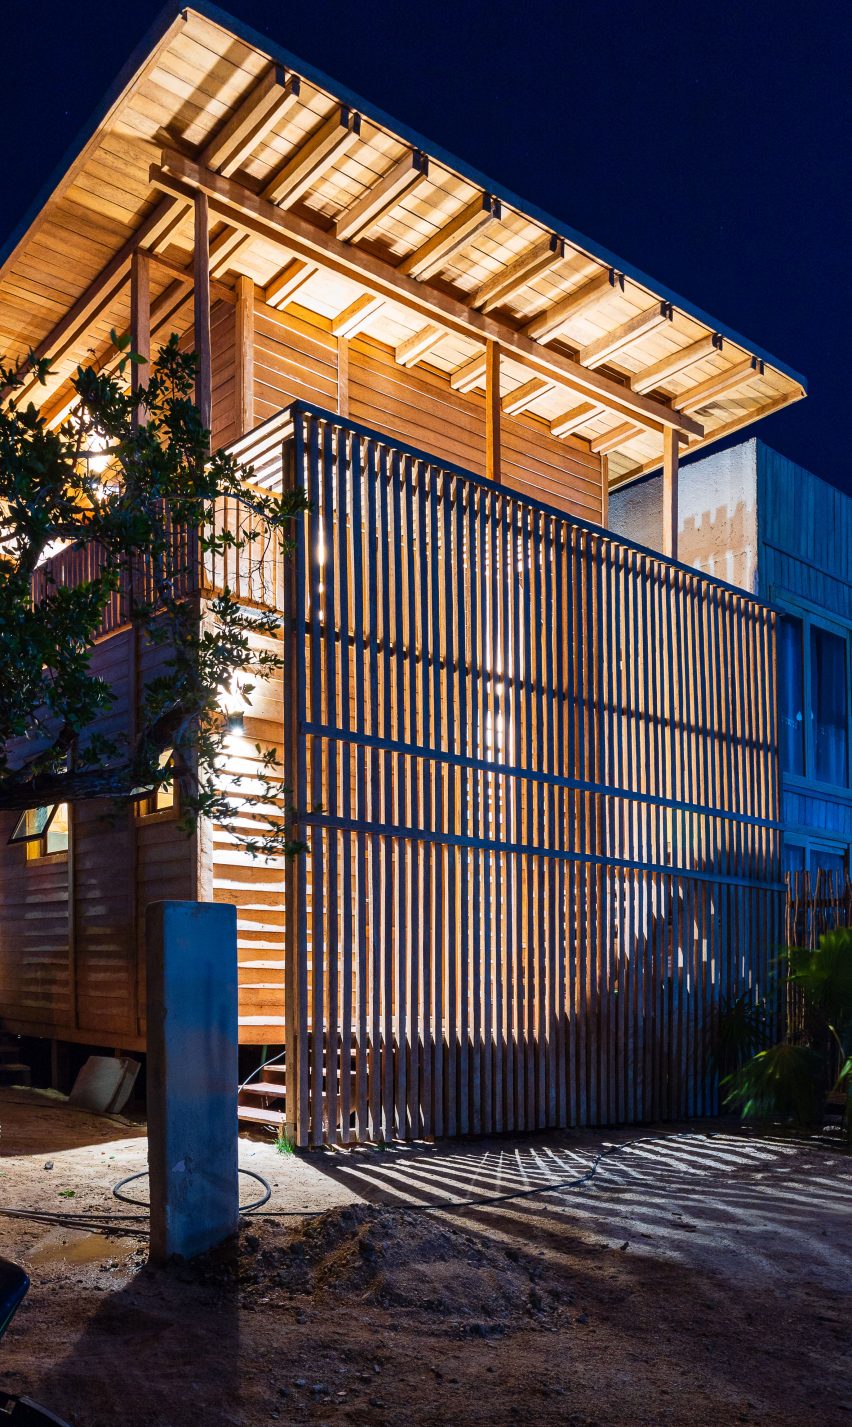 Casa Numa at night with exterior coconut palm timber screen partially blocking the warm light coming from inside